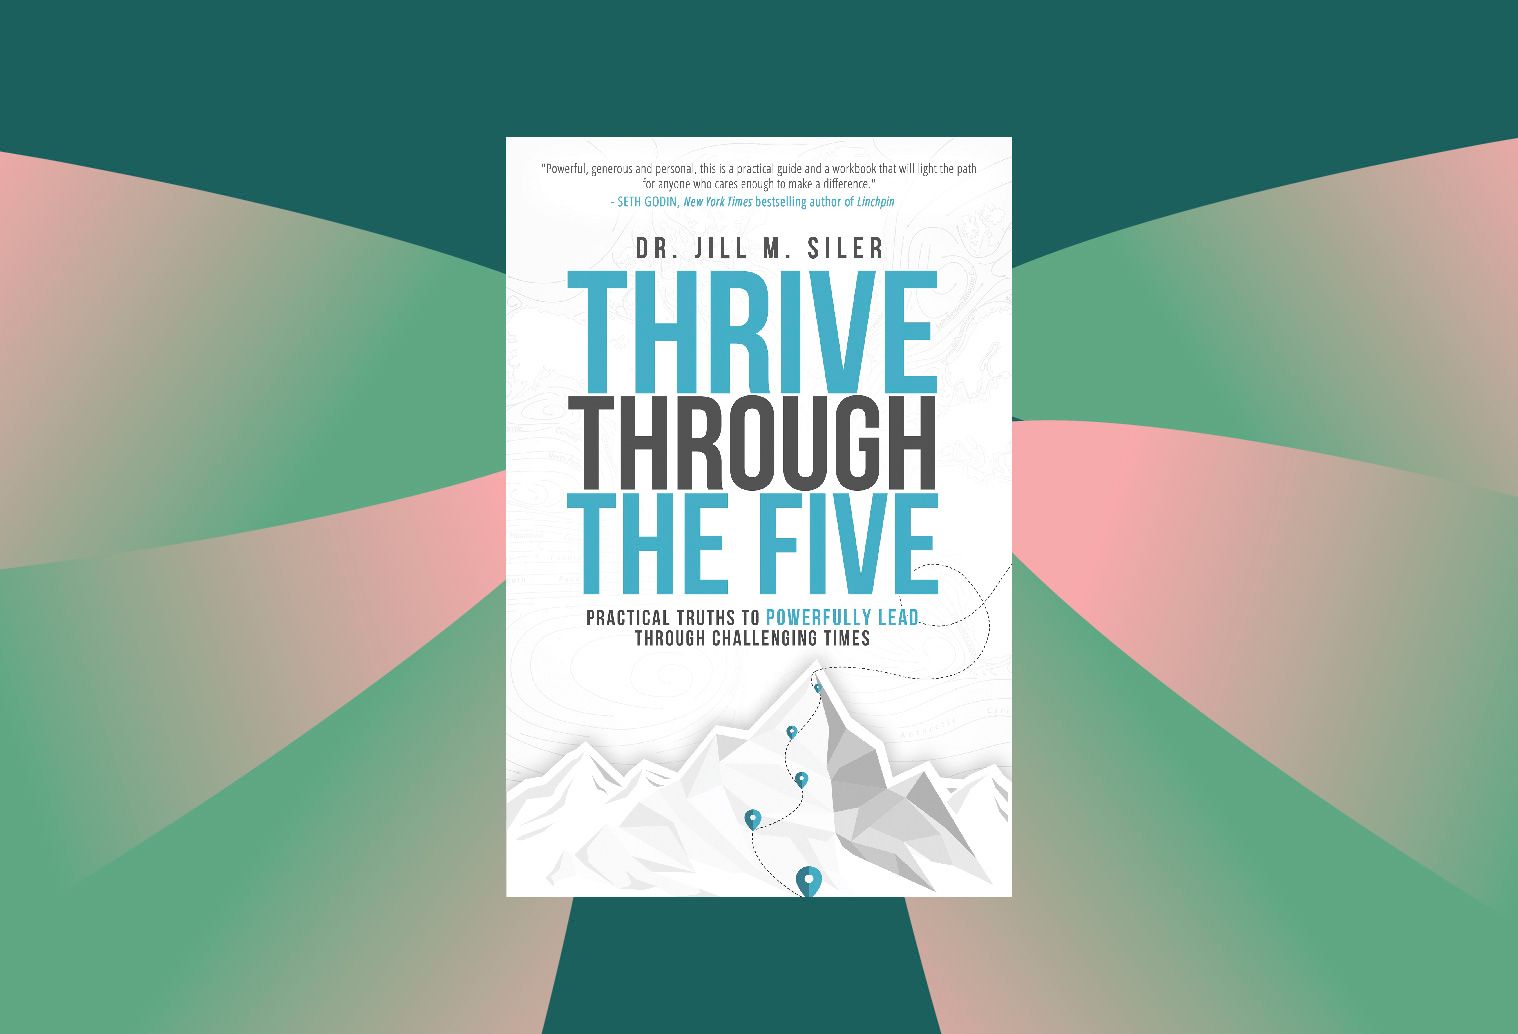 Dr. Jill Siler's book, Thrive Through The Five: Practical Truths to Powerfully Lead Through Challenging Times